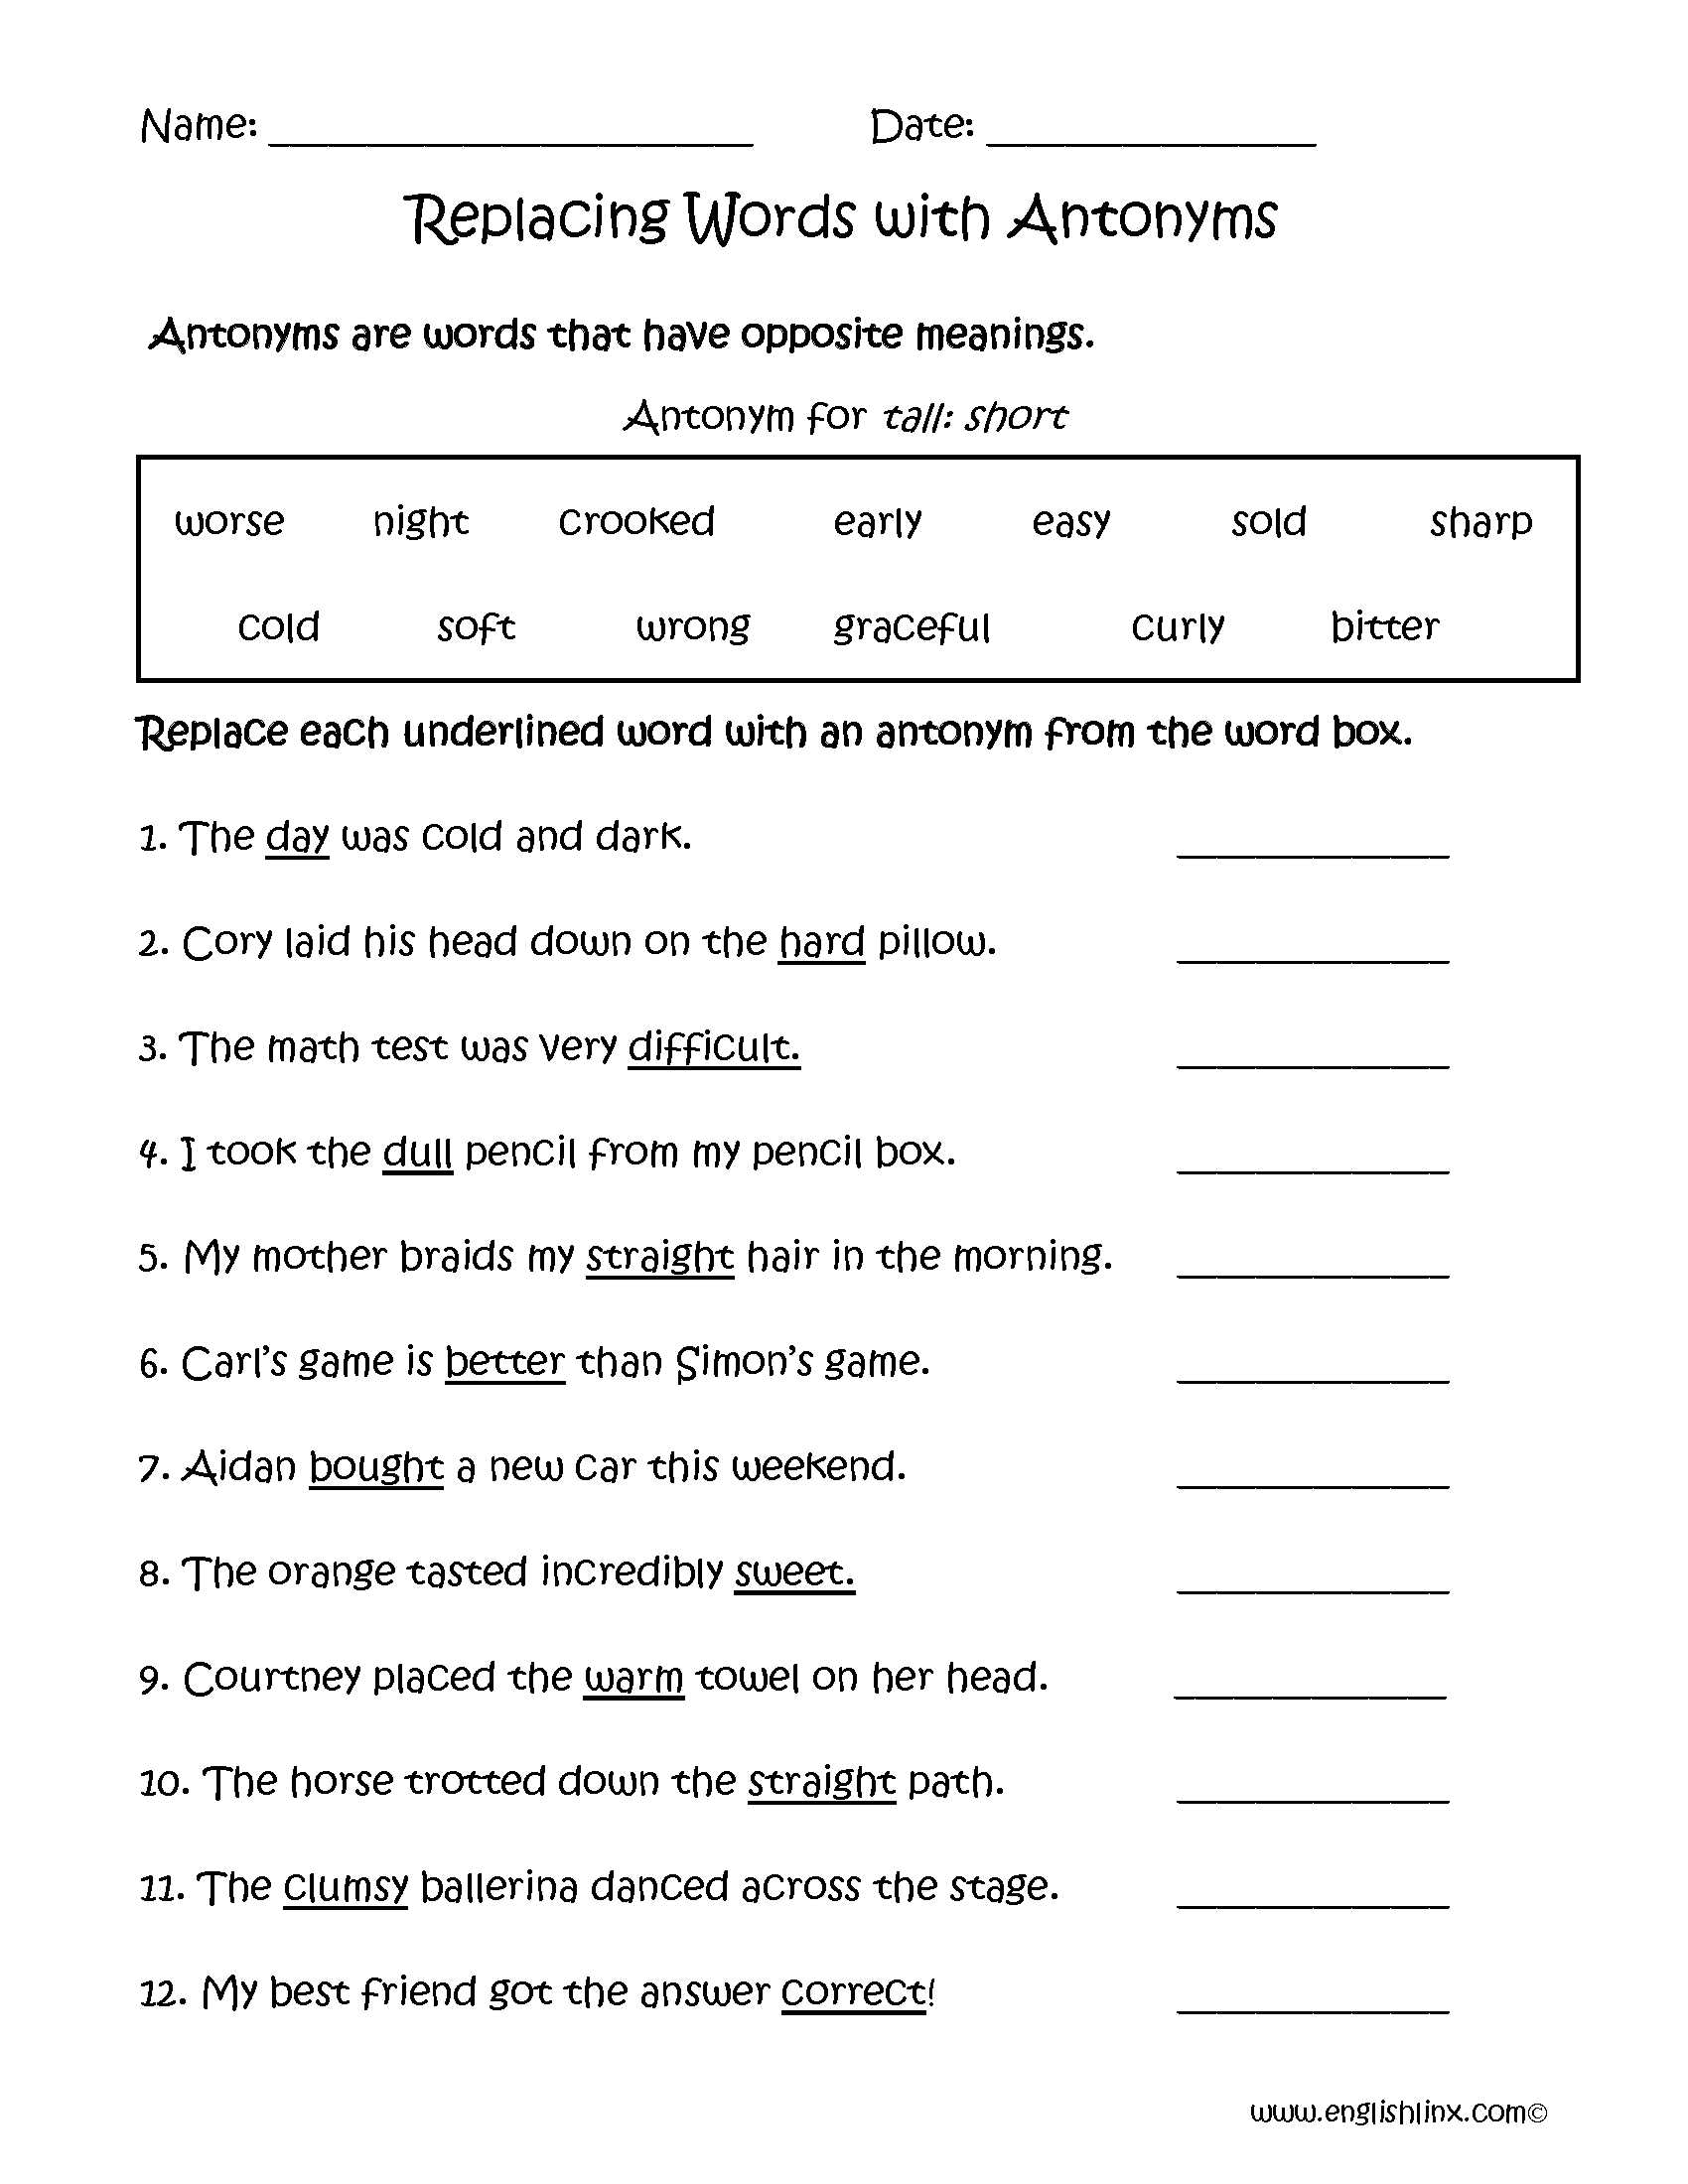 Simple Compound and Complex Sentences Worksheet Pdf with Answers Along with Replacing Words with Antonyms Worksheets